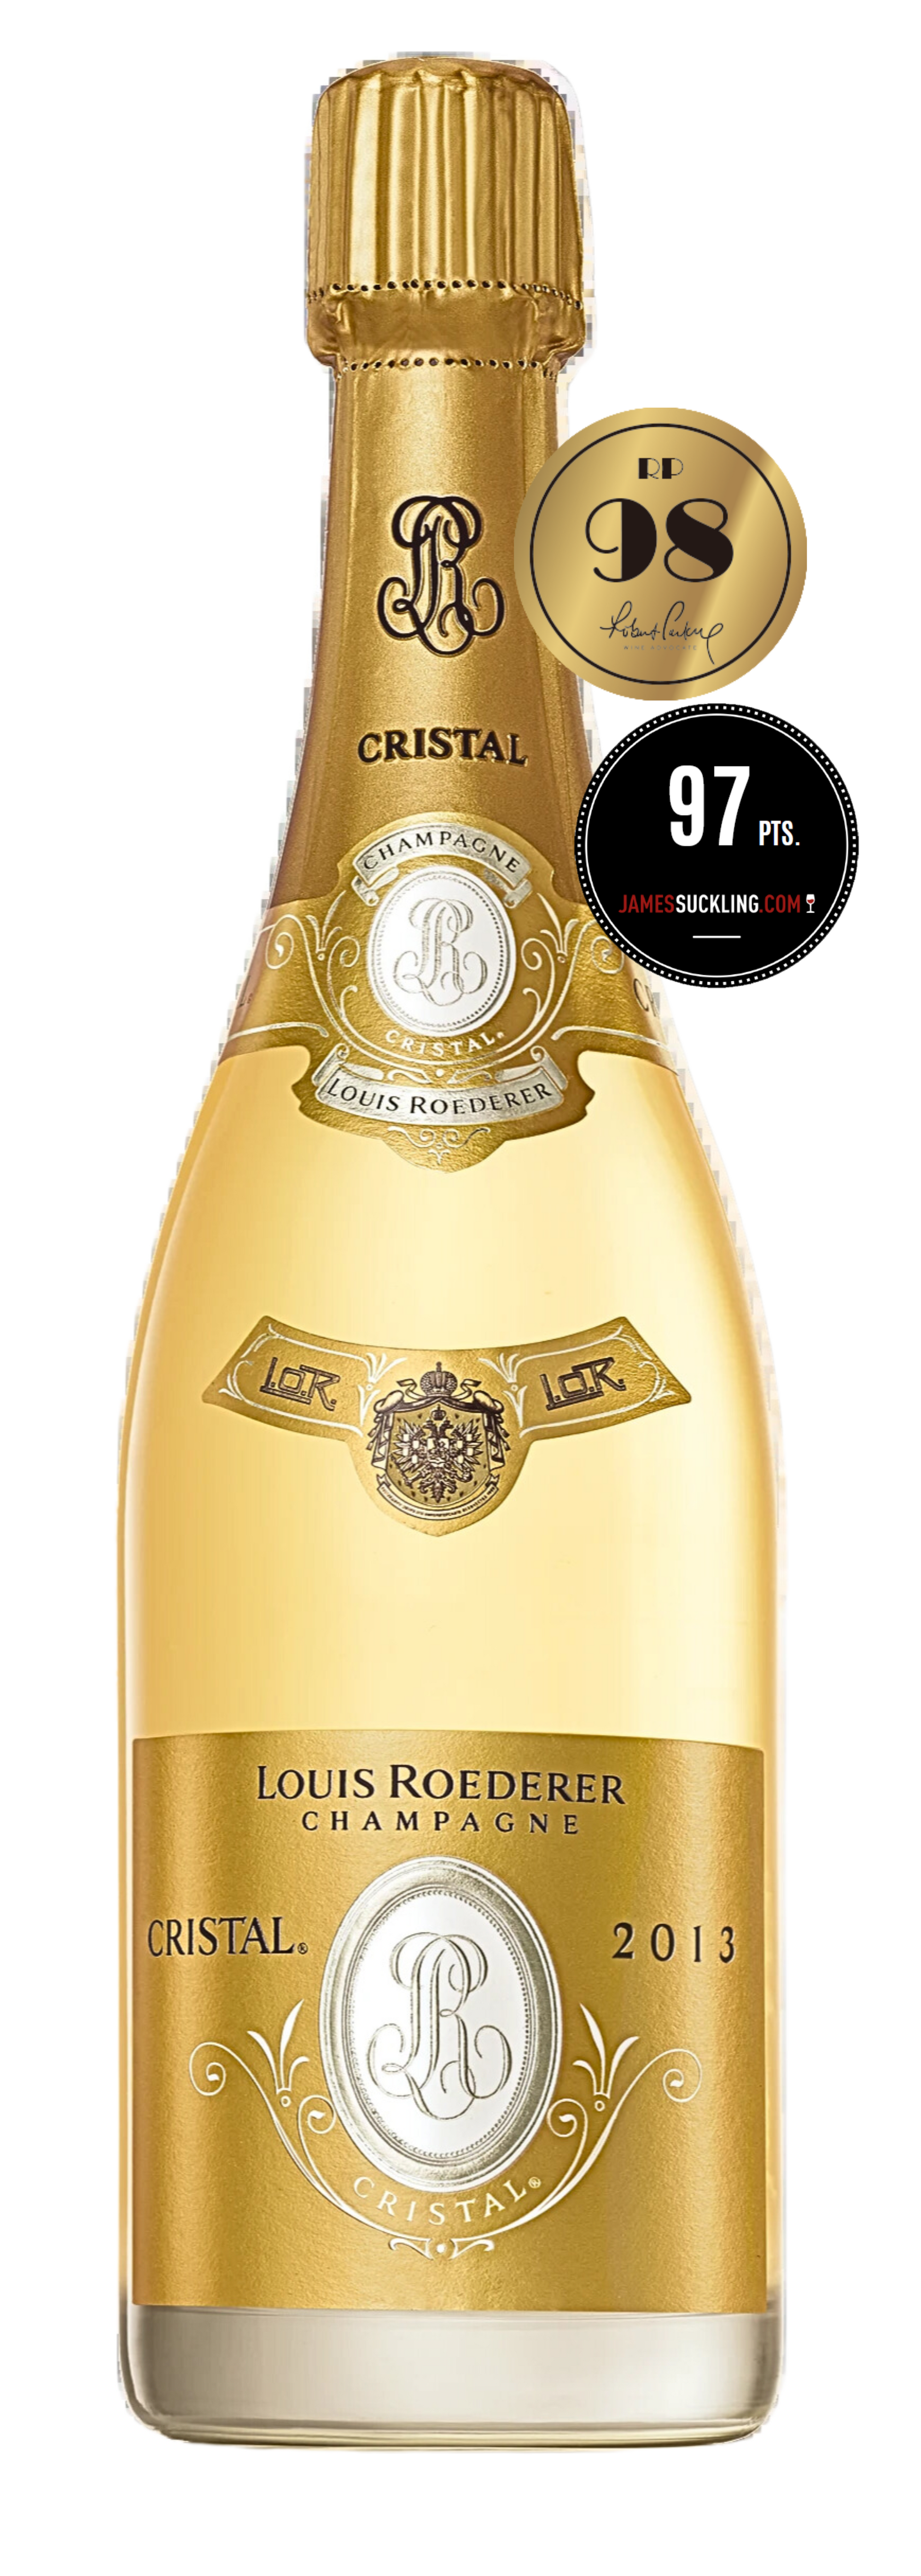 Champagne Louis Roederer Cristal 2013 (RP:98)